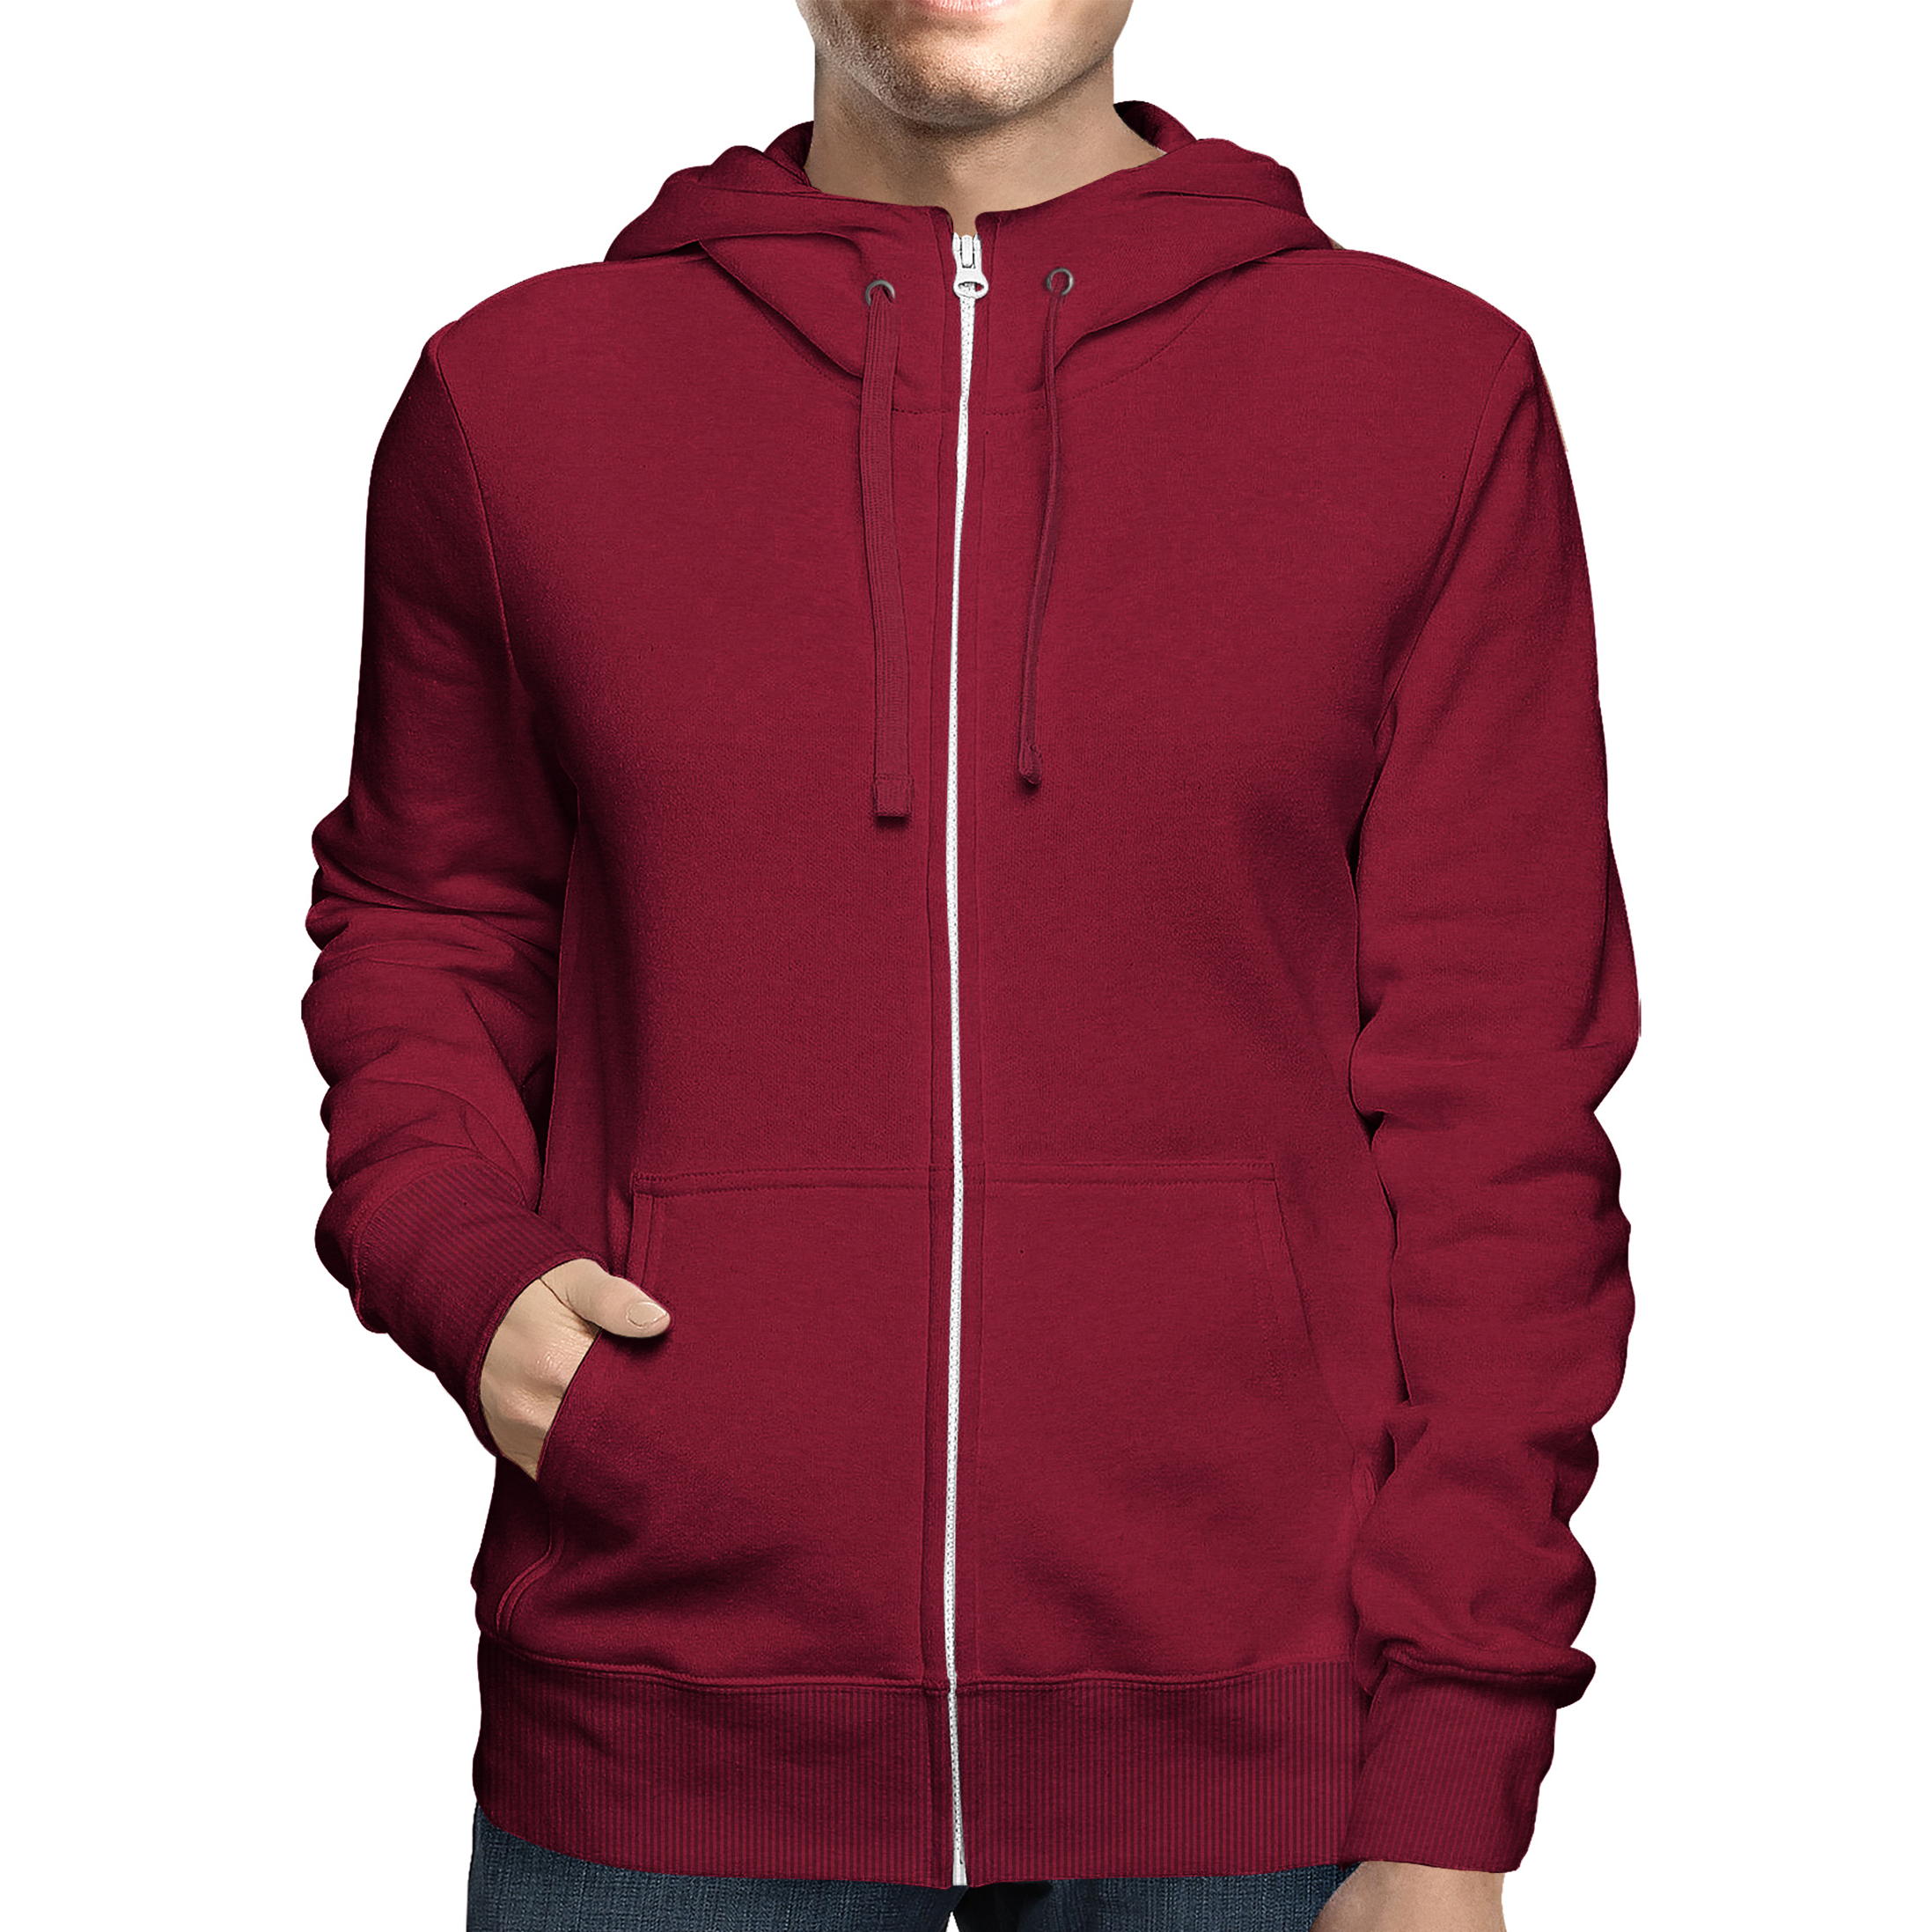 2-Pack: Men's Full Zip Up Fleece-Lined Hoodie Sweatshirt (Big & Tall Size Available) - Burgundy, 2x-large